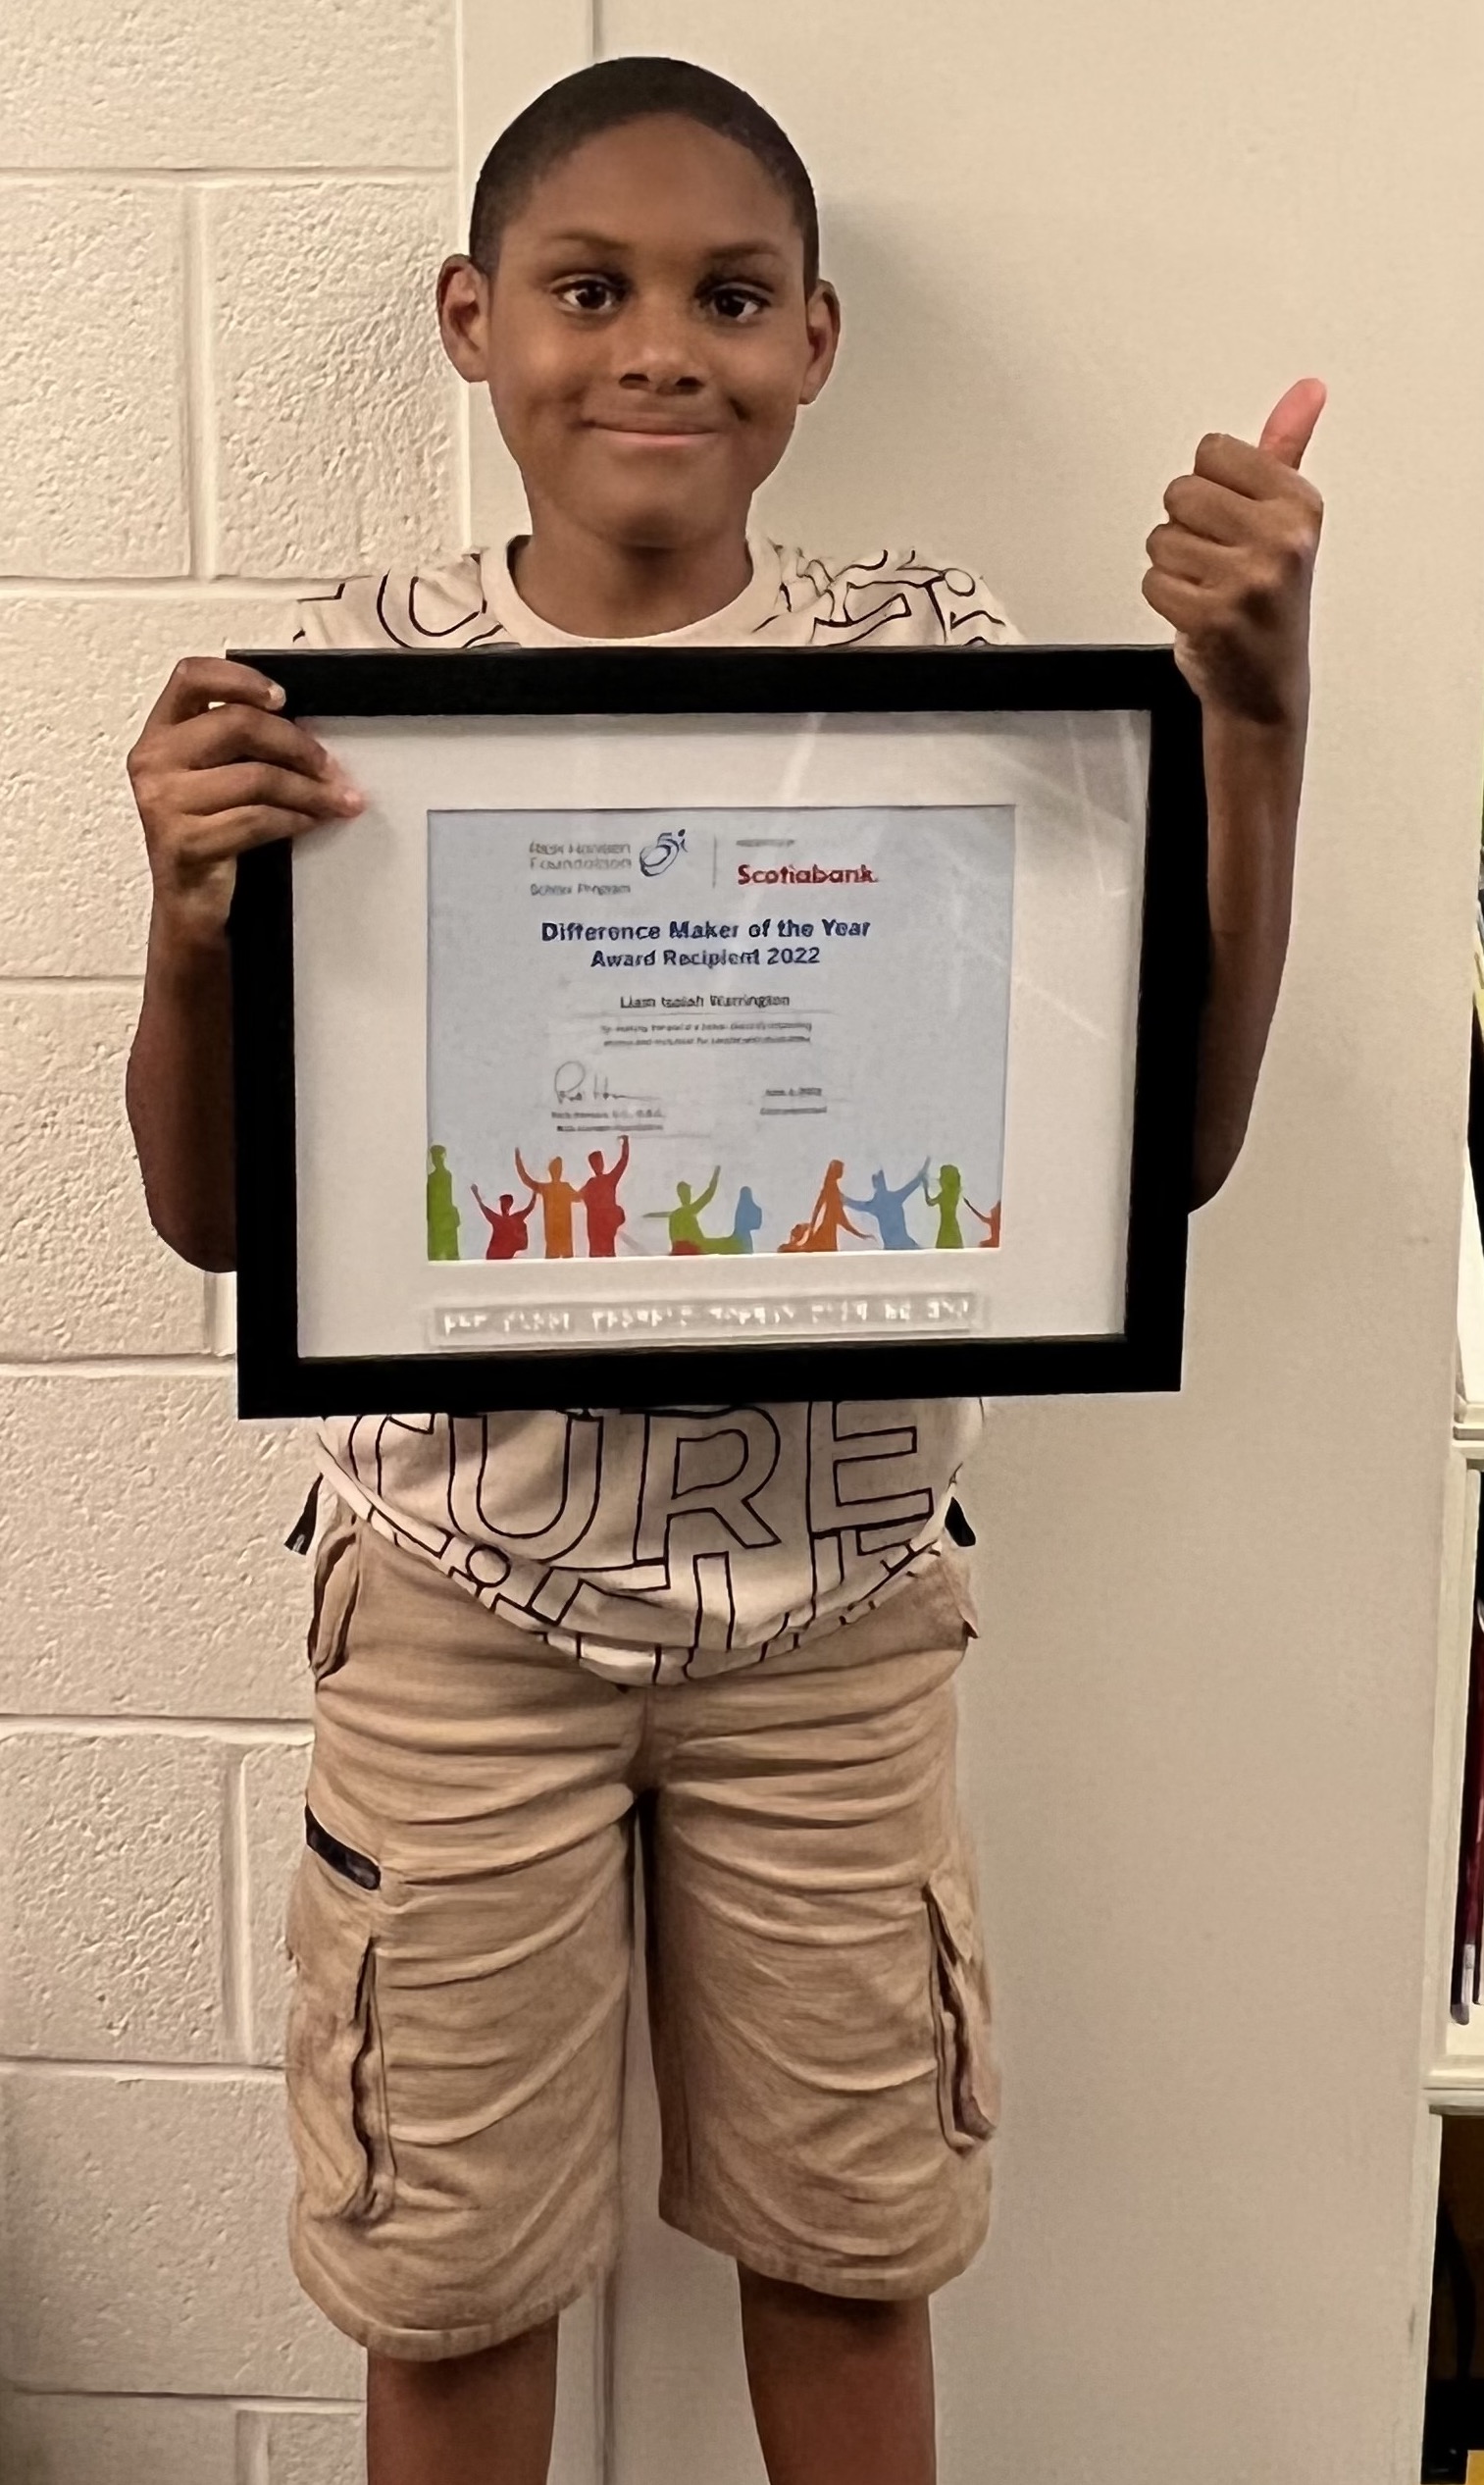 Young Black boy holding up a framed Difference Maker award certificate. He is wearing beige shorts and a white T-shirt.